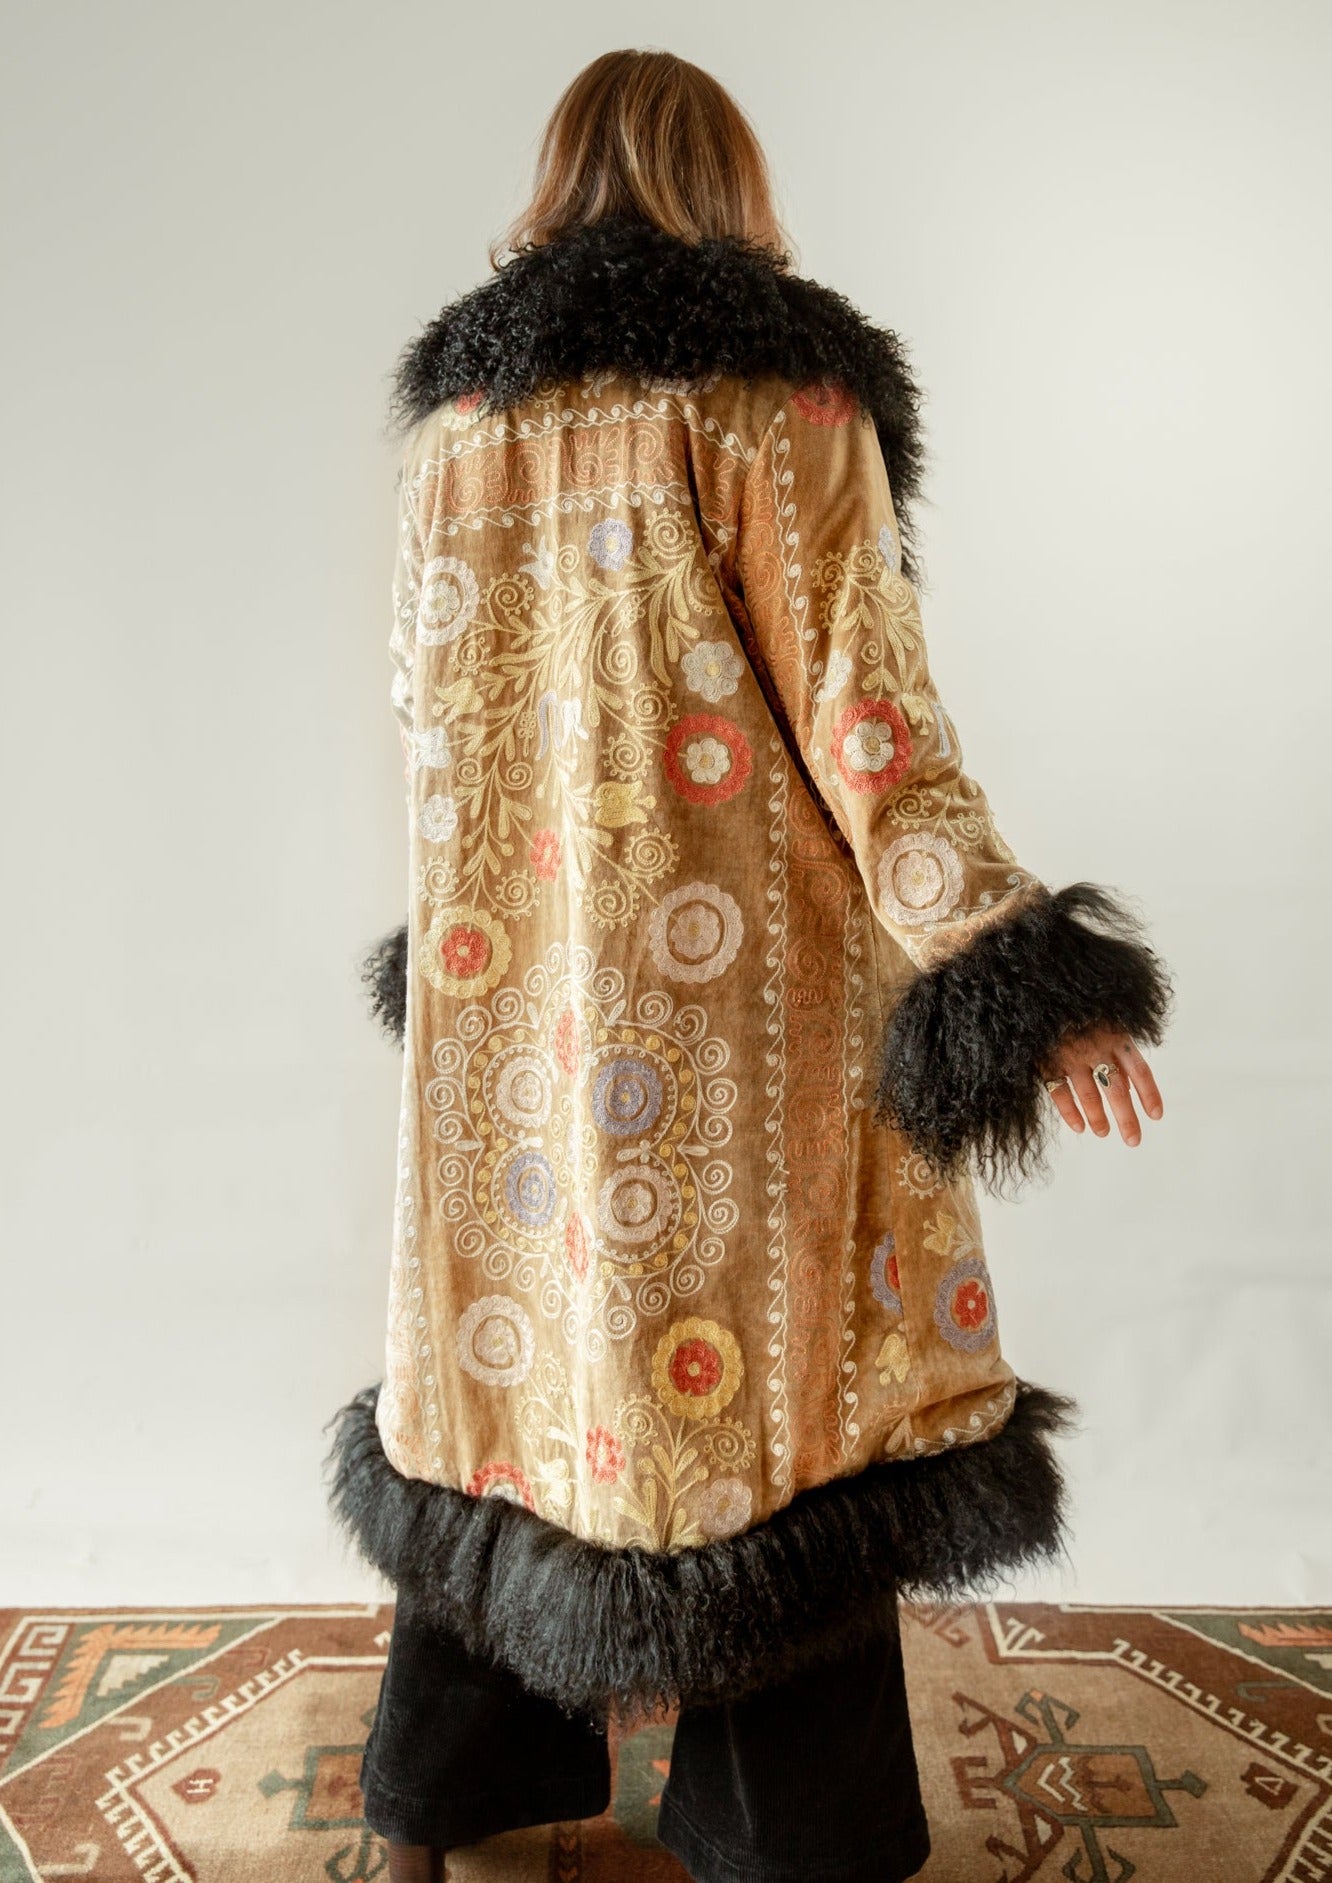 Beautifully handcrafted from 100% real extra soft and curly Tibetan / Mongolian  lamb fur.